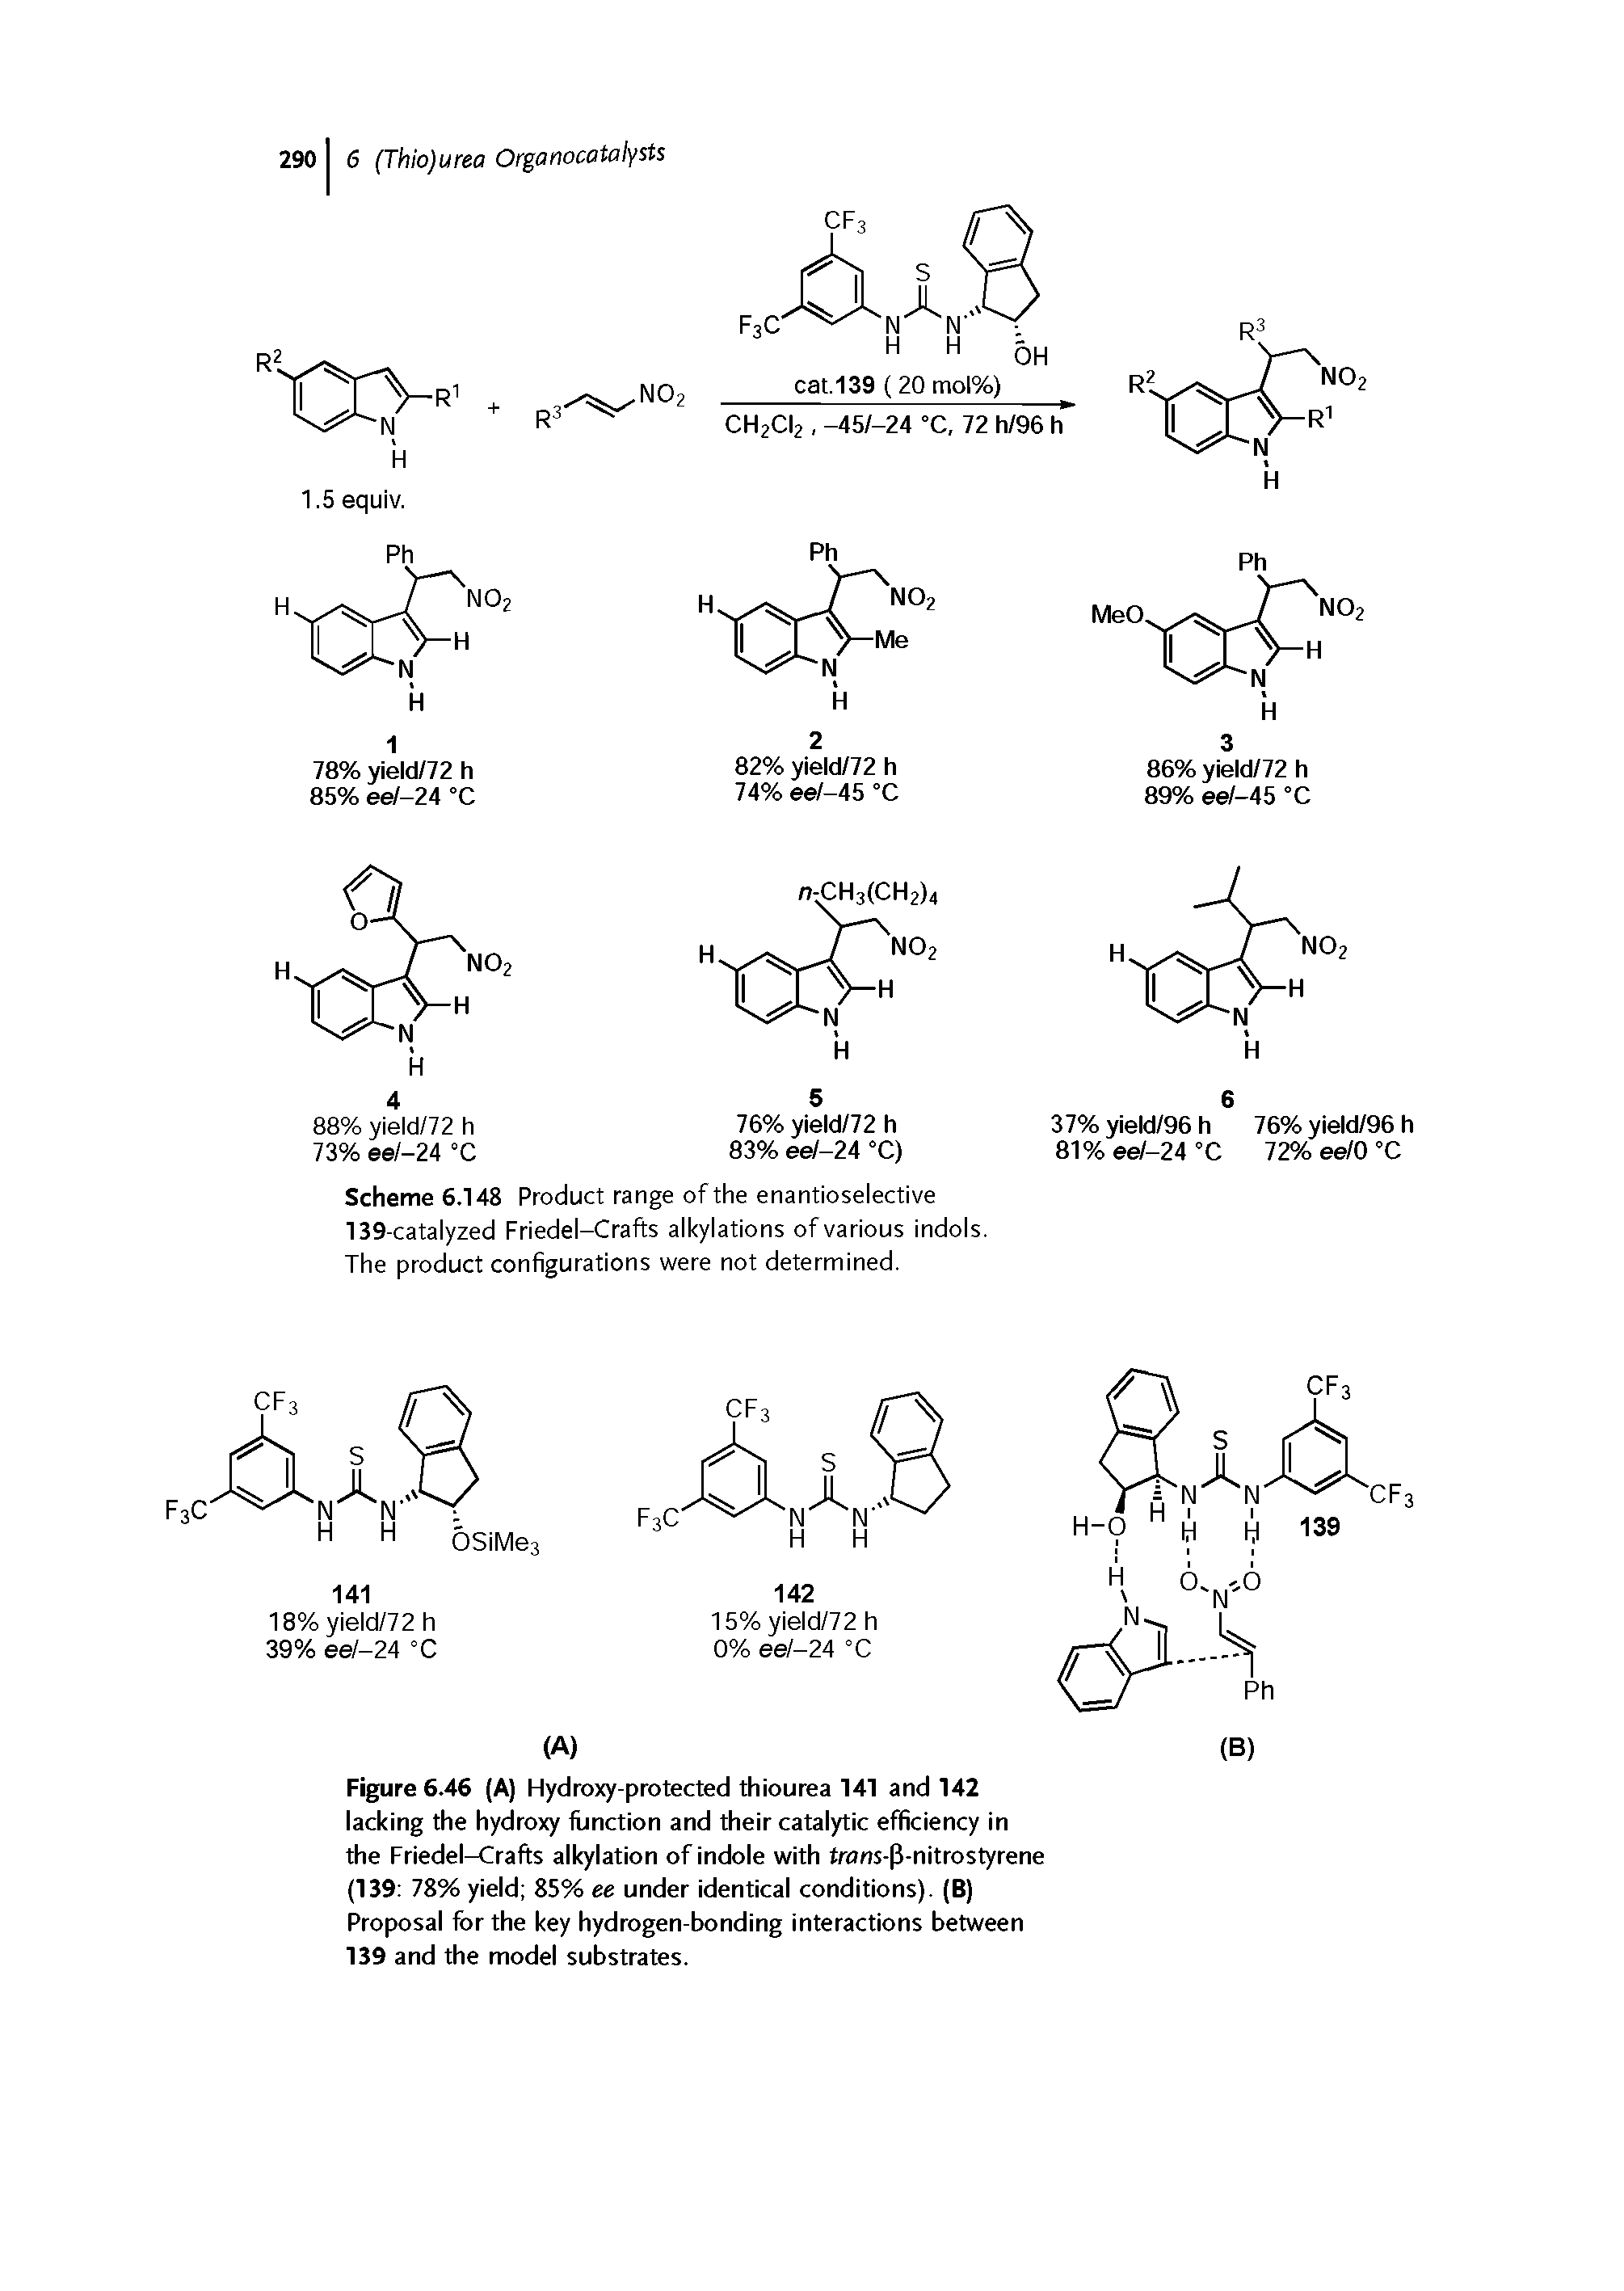 Scheme 6.148 Product range of the enantioselective 139-catalyzed Friedel-Crafts alkylations of various indols. The product configurations were not determined.